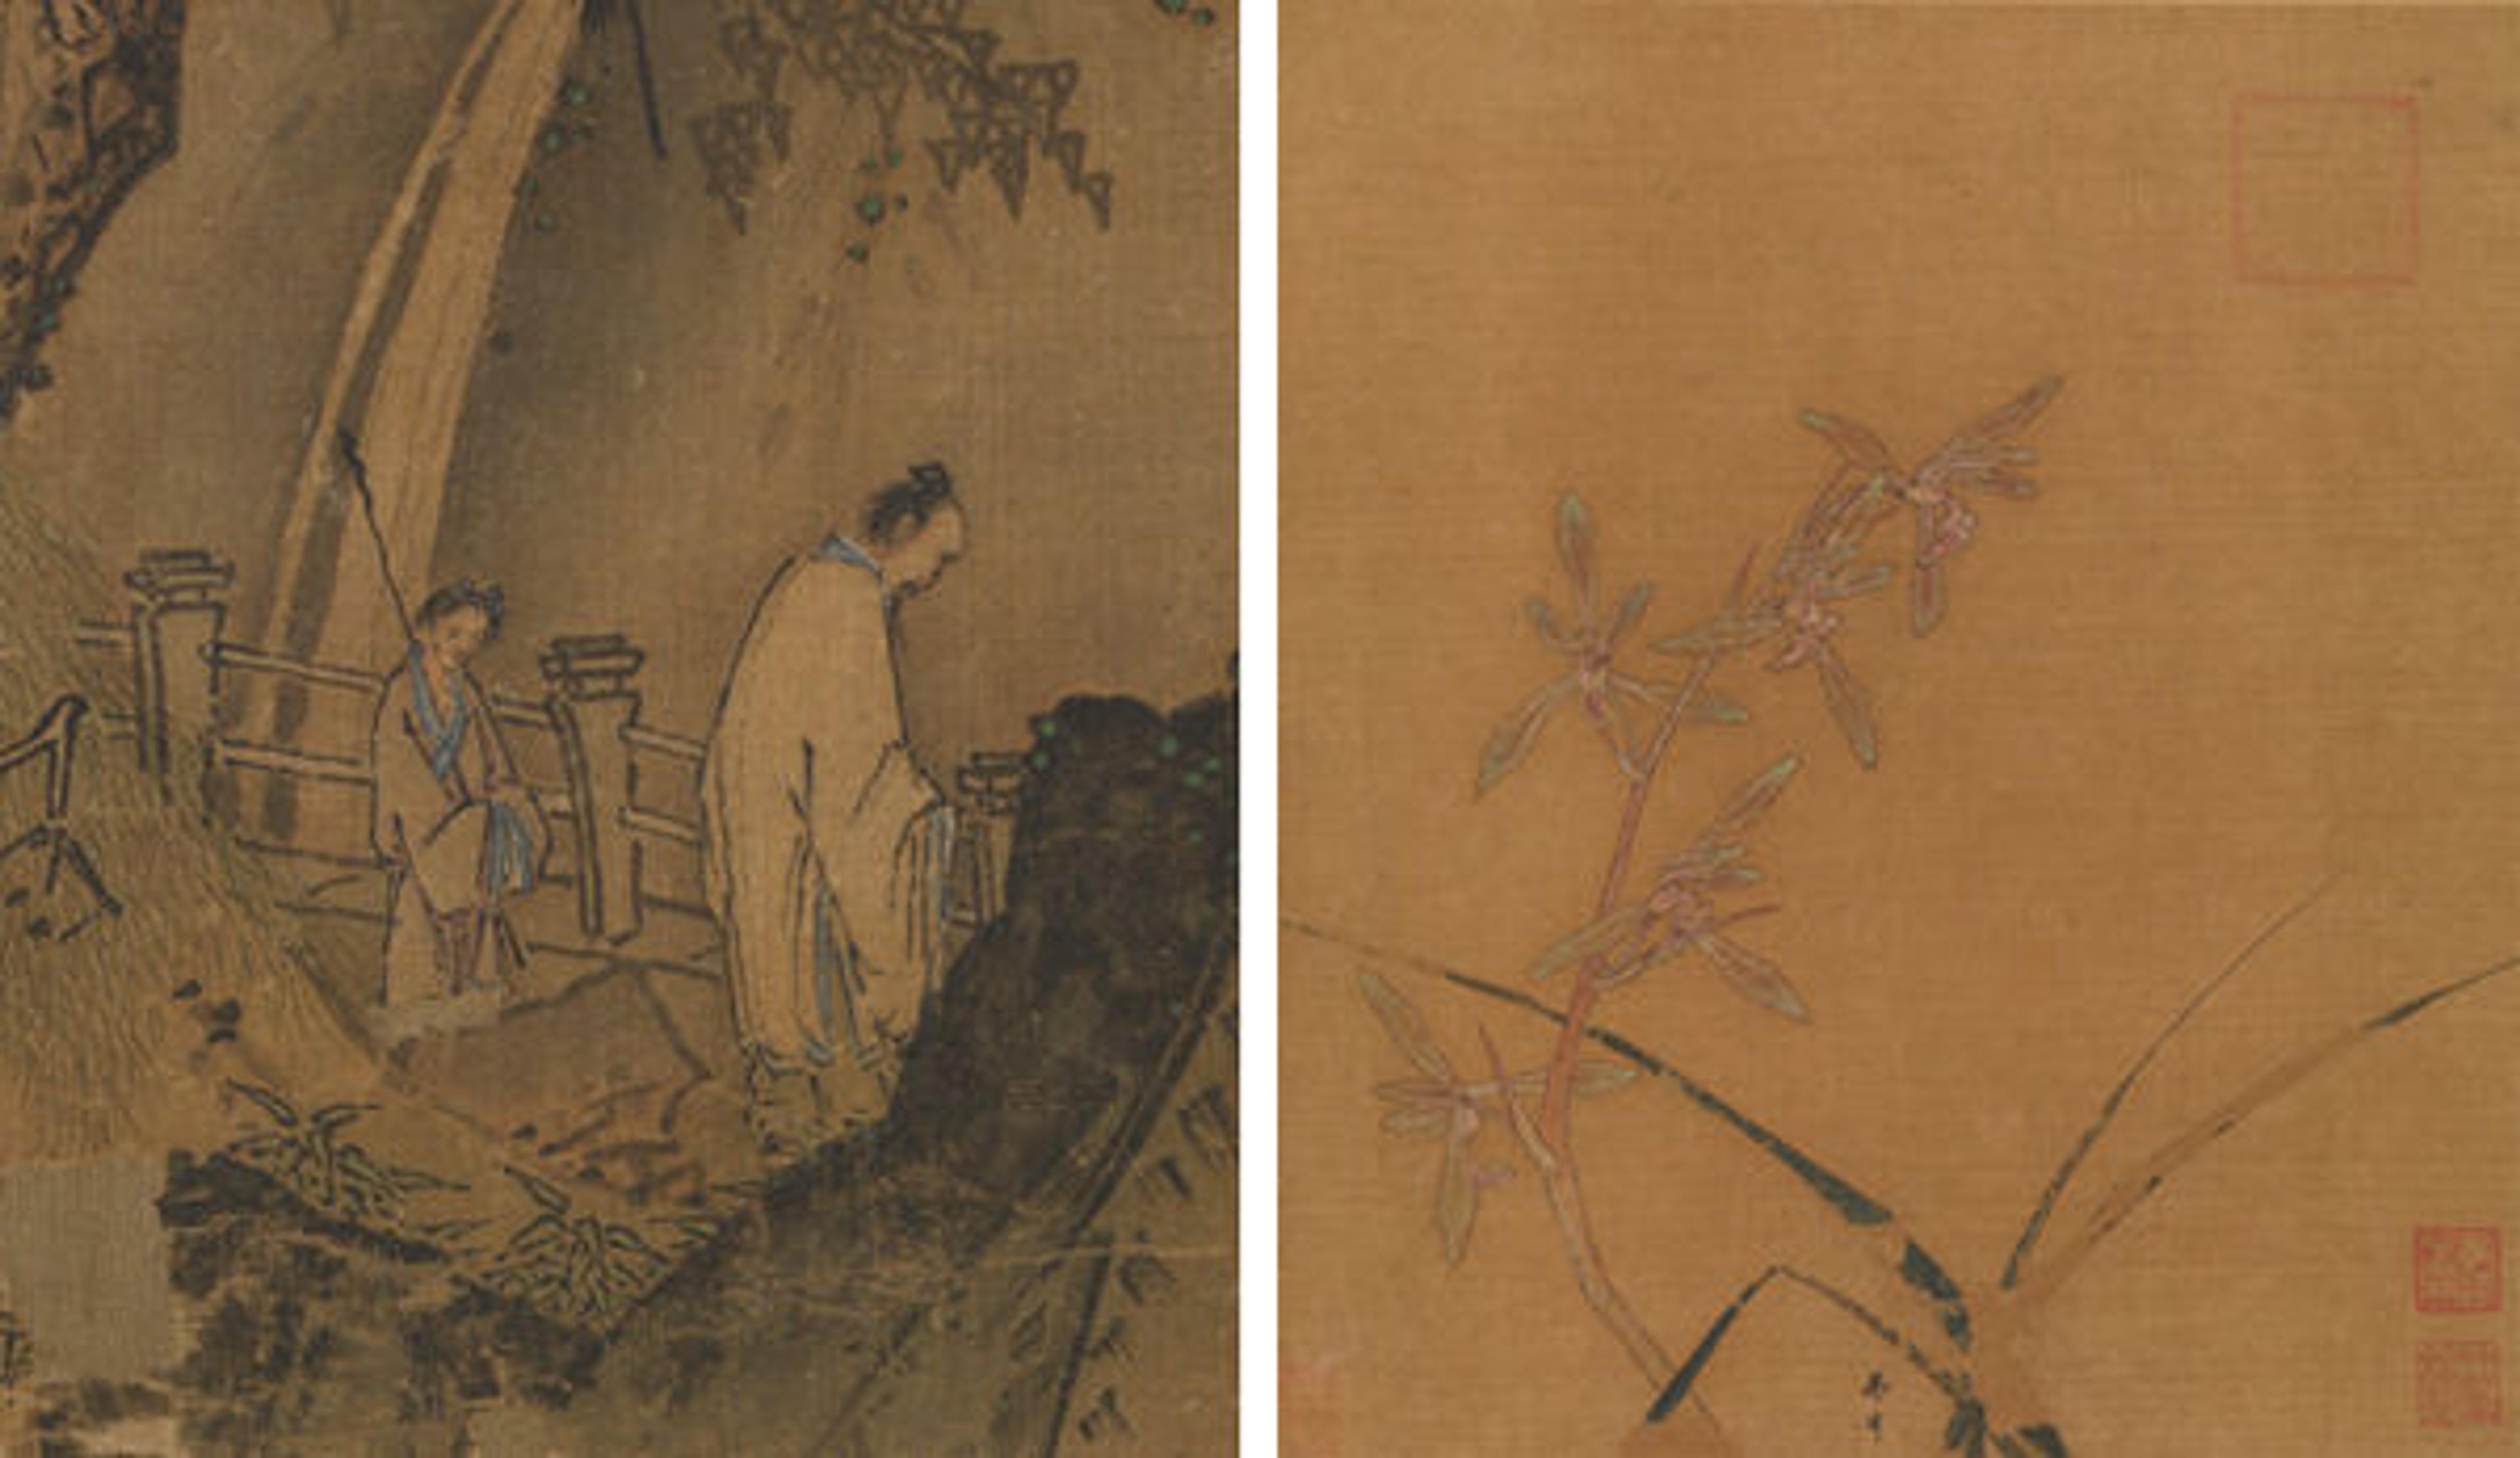 Fig. 12 (left). Ma Yuan (active ca. 1190–1225). Scholar viewing a waterfall (detail), late 12th–early 13th century. Southern Song dynasty (1127–1279). Album leaf; ink and color on silk. The Metropolitan Museum of Art, New York, Ex coll.: C. C. Wang Family, Gift of The Dillon Fund, 1973 (1973.120.9). Fig. 13 (right). Ma Lin (ca. 1180–after 1256), Orchids, second quarter of the 13th century. Southern Song dynasty (1127–1279). Album leaf; ink and color on silk. The Metropolitan Museum of Art, New York, Ex coll.: C. C. Wang Family, Gift of The Dillon Fund, 1973 (1973.120.10)